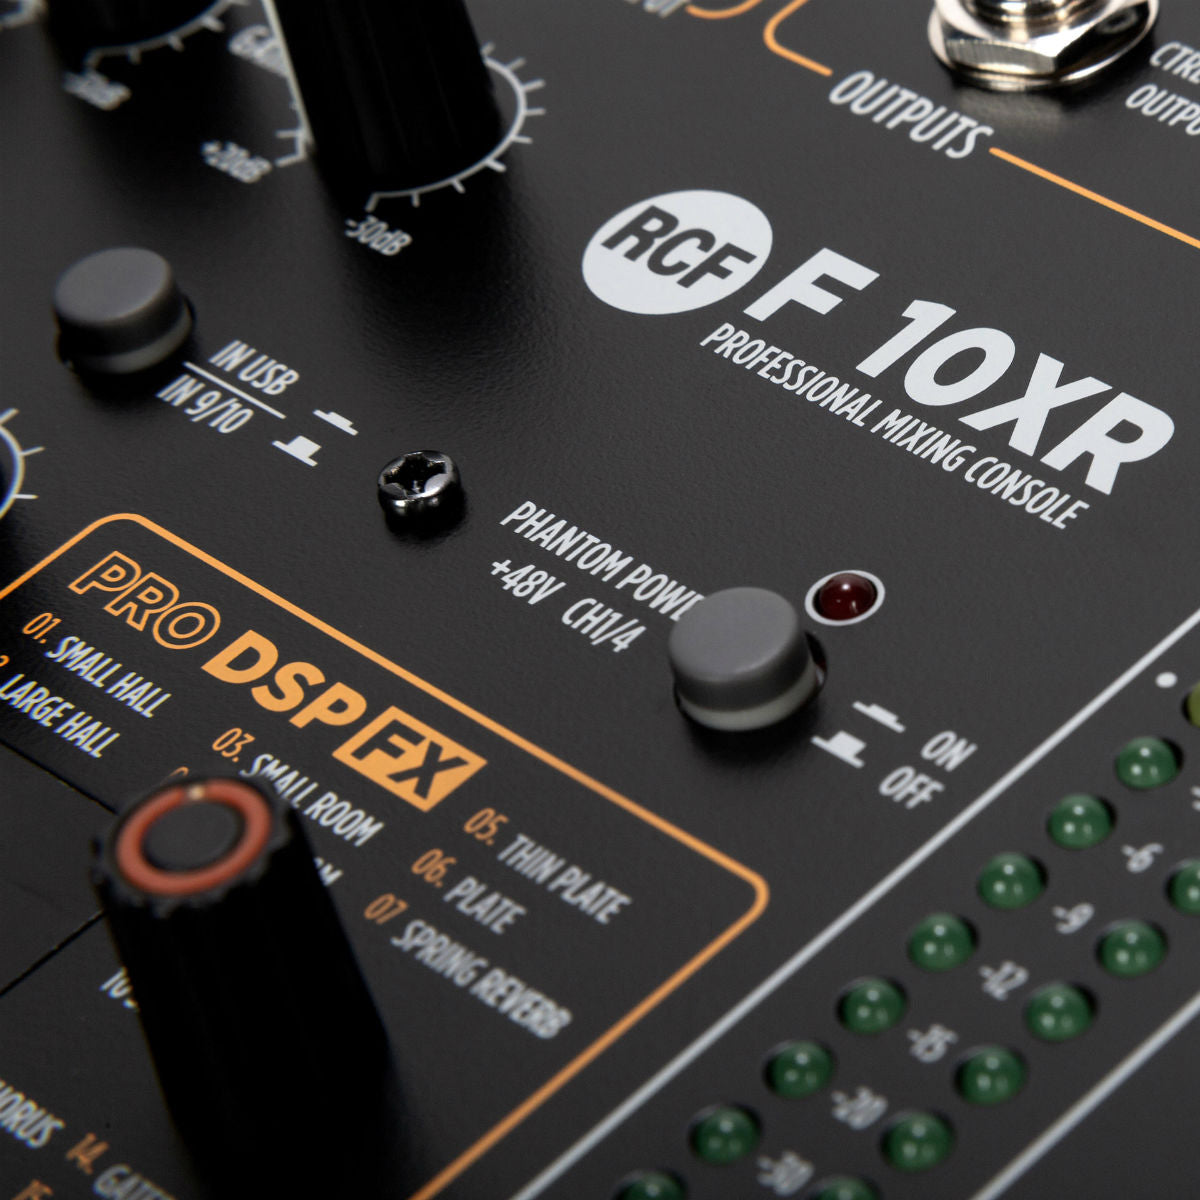 RCF F 10XR 10-Channel Mixer With Multi-FX & Recording